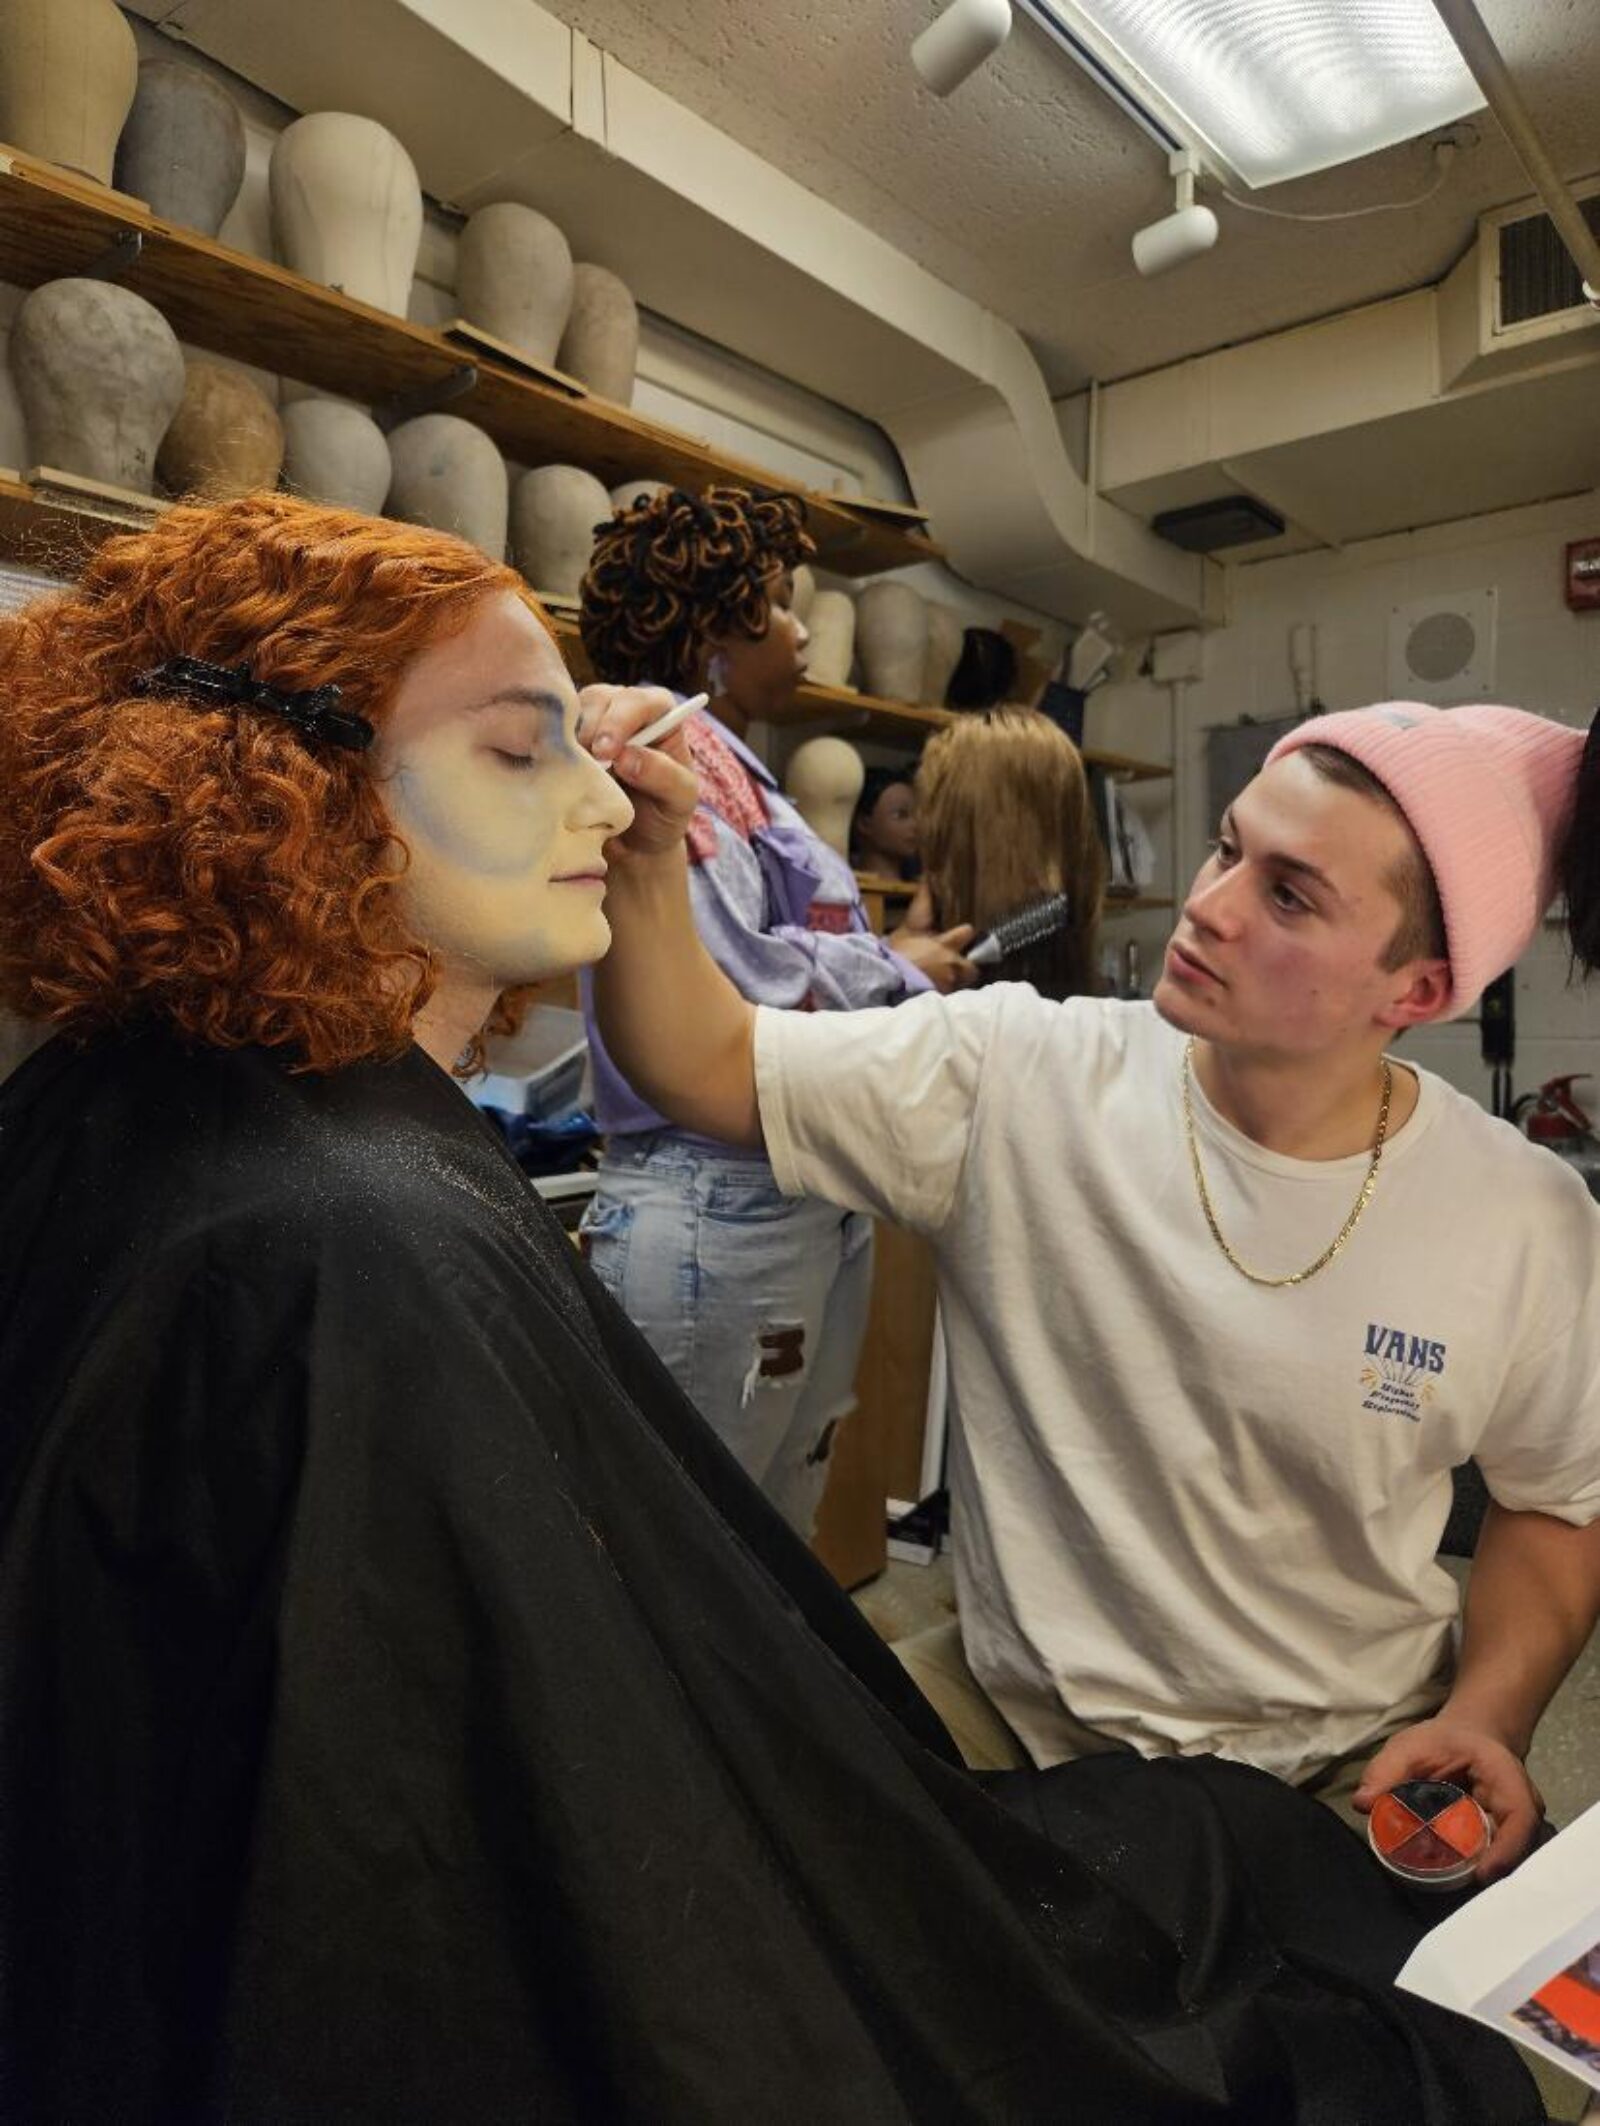 person applying costume makeup to another person